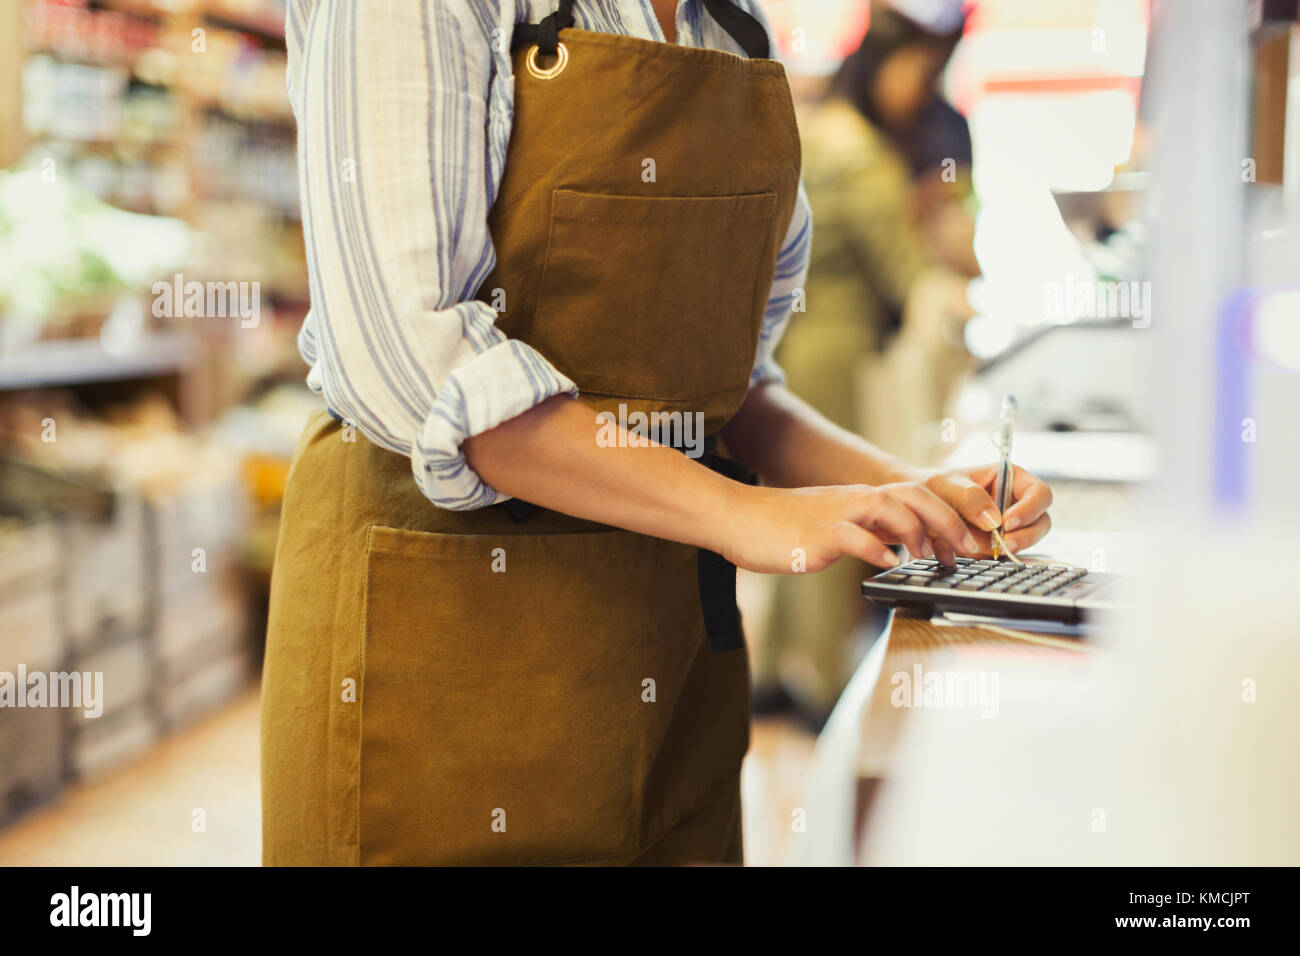 Female cashier using calculator in grocery store Stock Photo